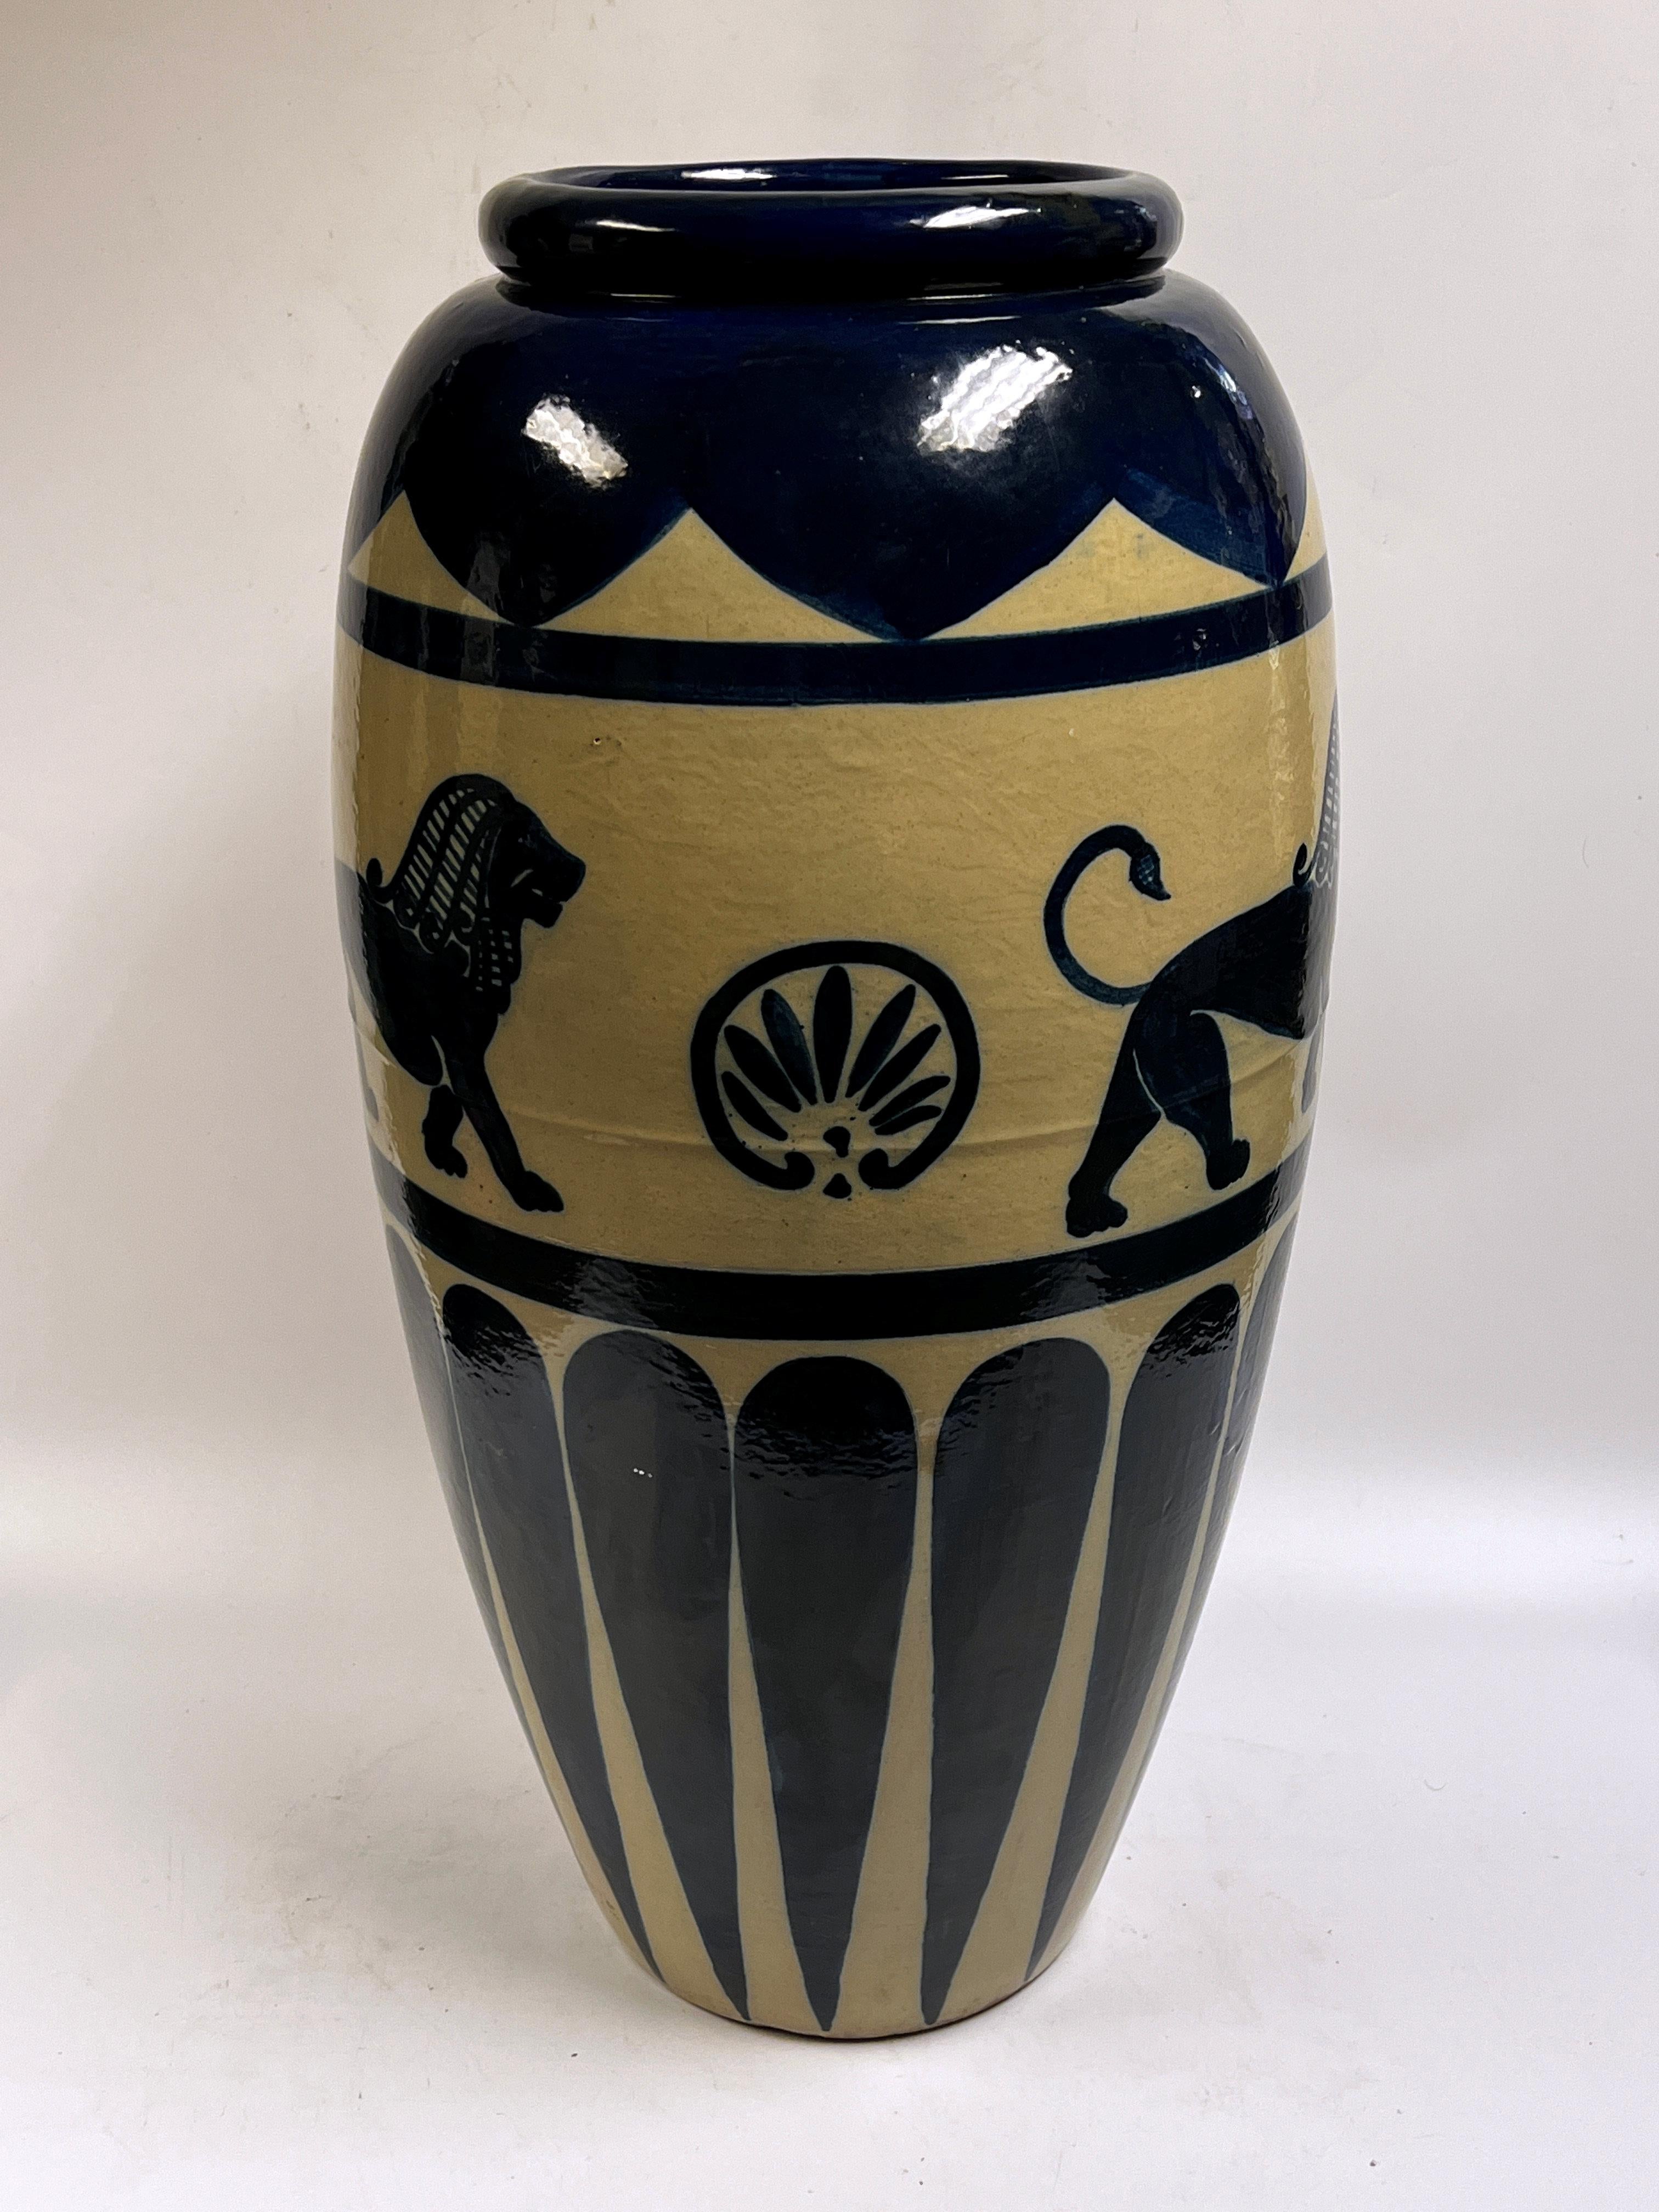 Stoneware jardiniere with cobalt blue glaze and ancient designs including standing lion in the ancient Babylonian style and Egyptian palmettes.